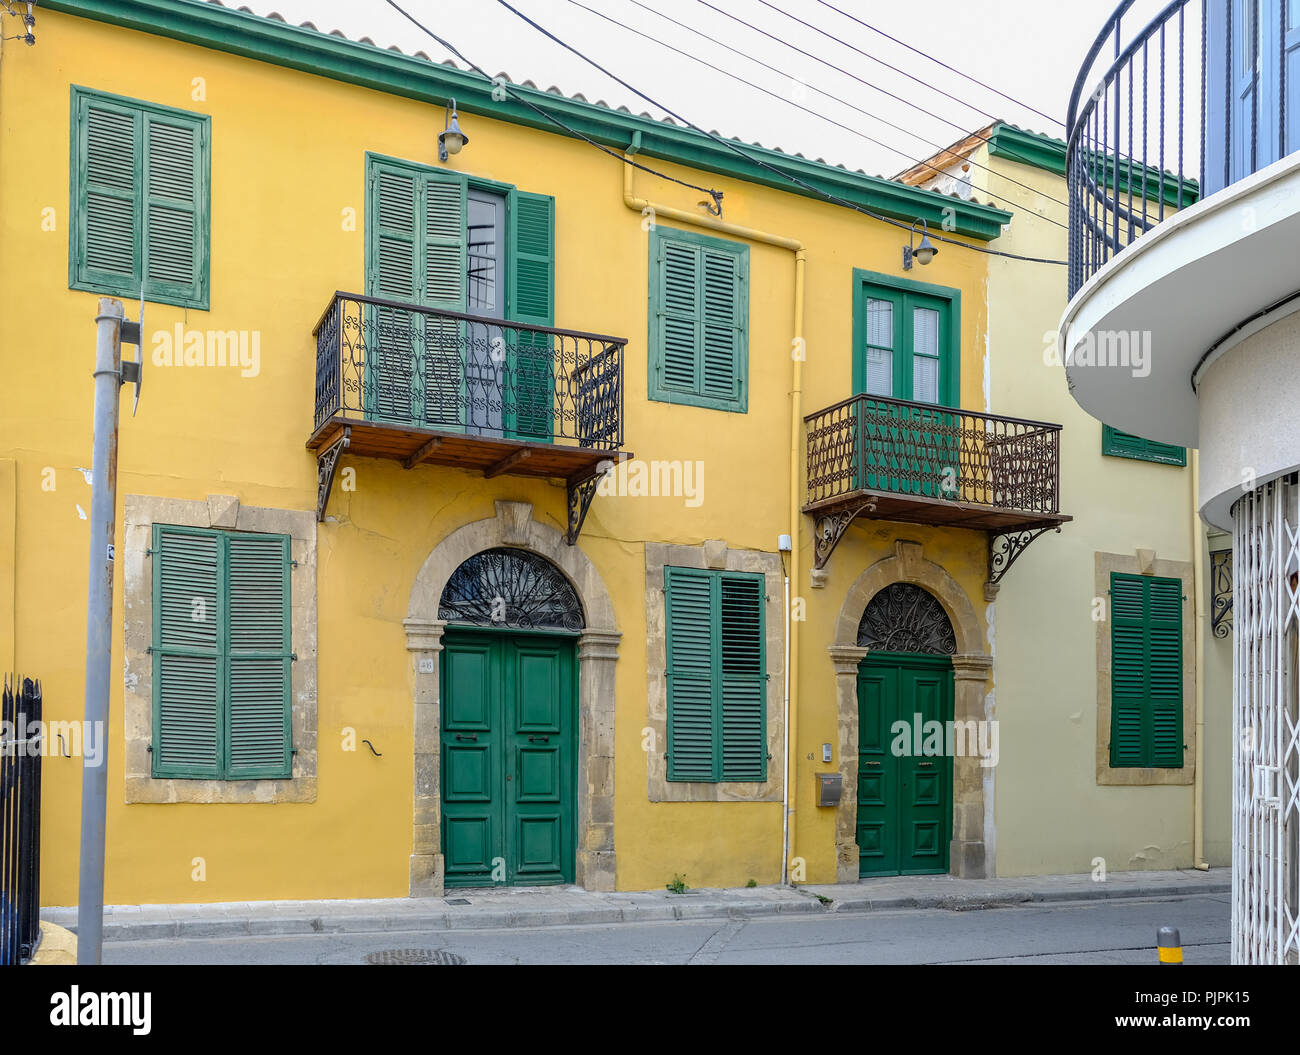 Nicosia, Cyprus - May 14, 2018: View of a typrical old house in the backstreets of Nicosia in Cyprus. Closed double doors and metal balconies. Stock Photo